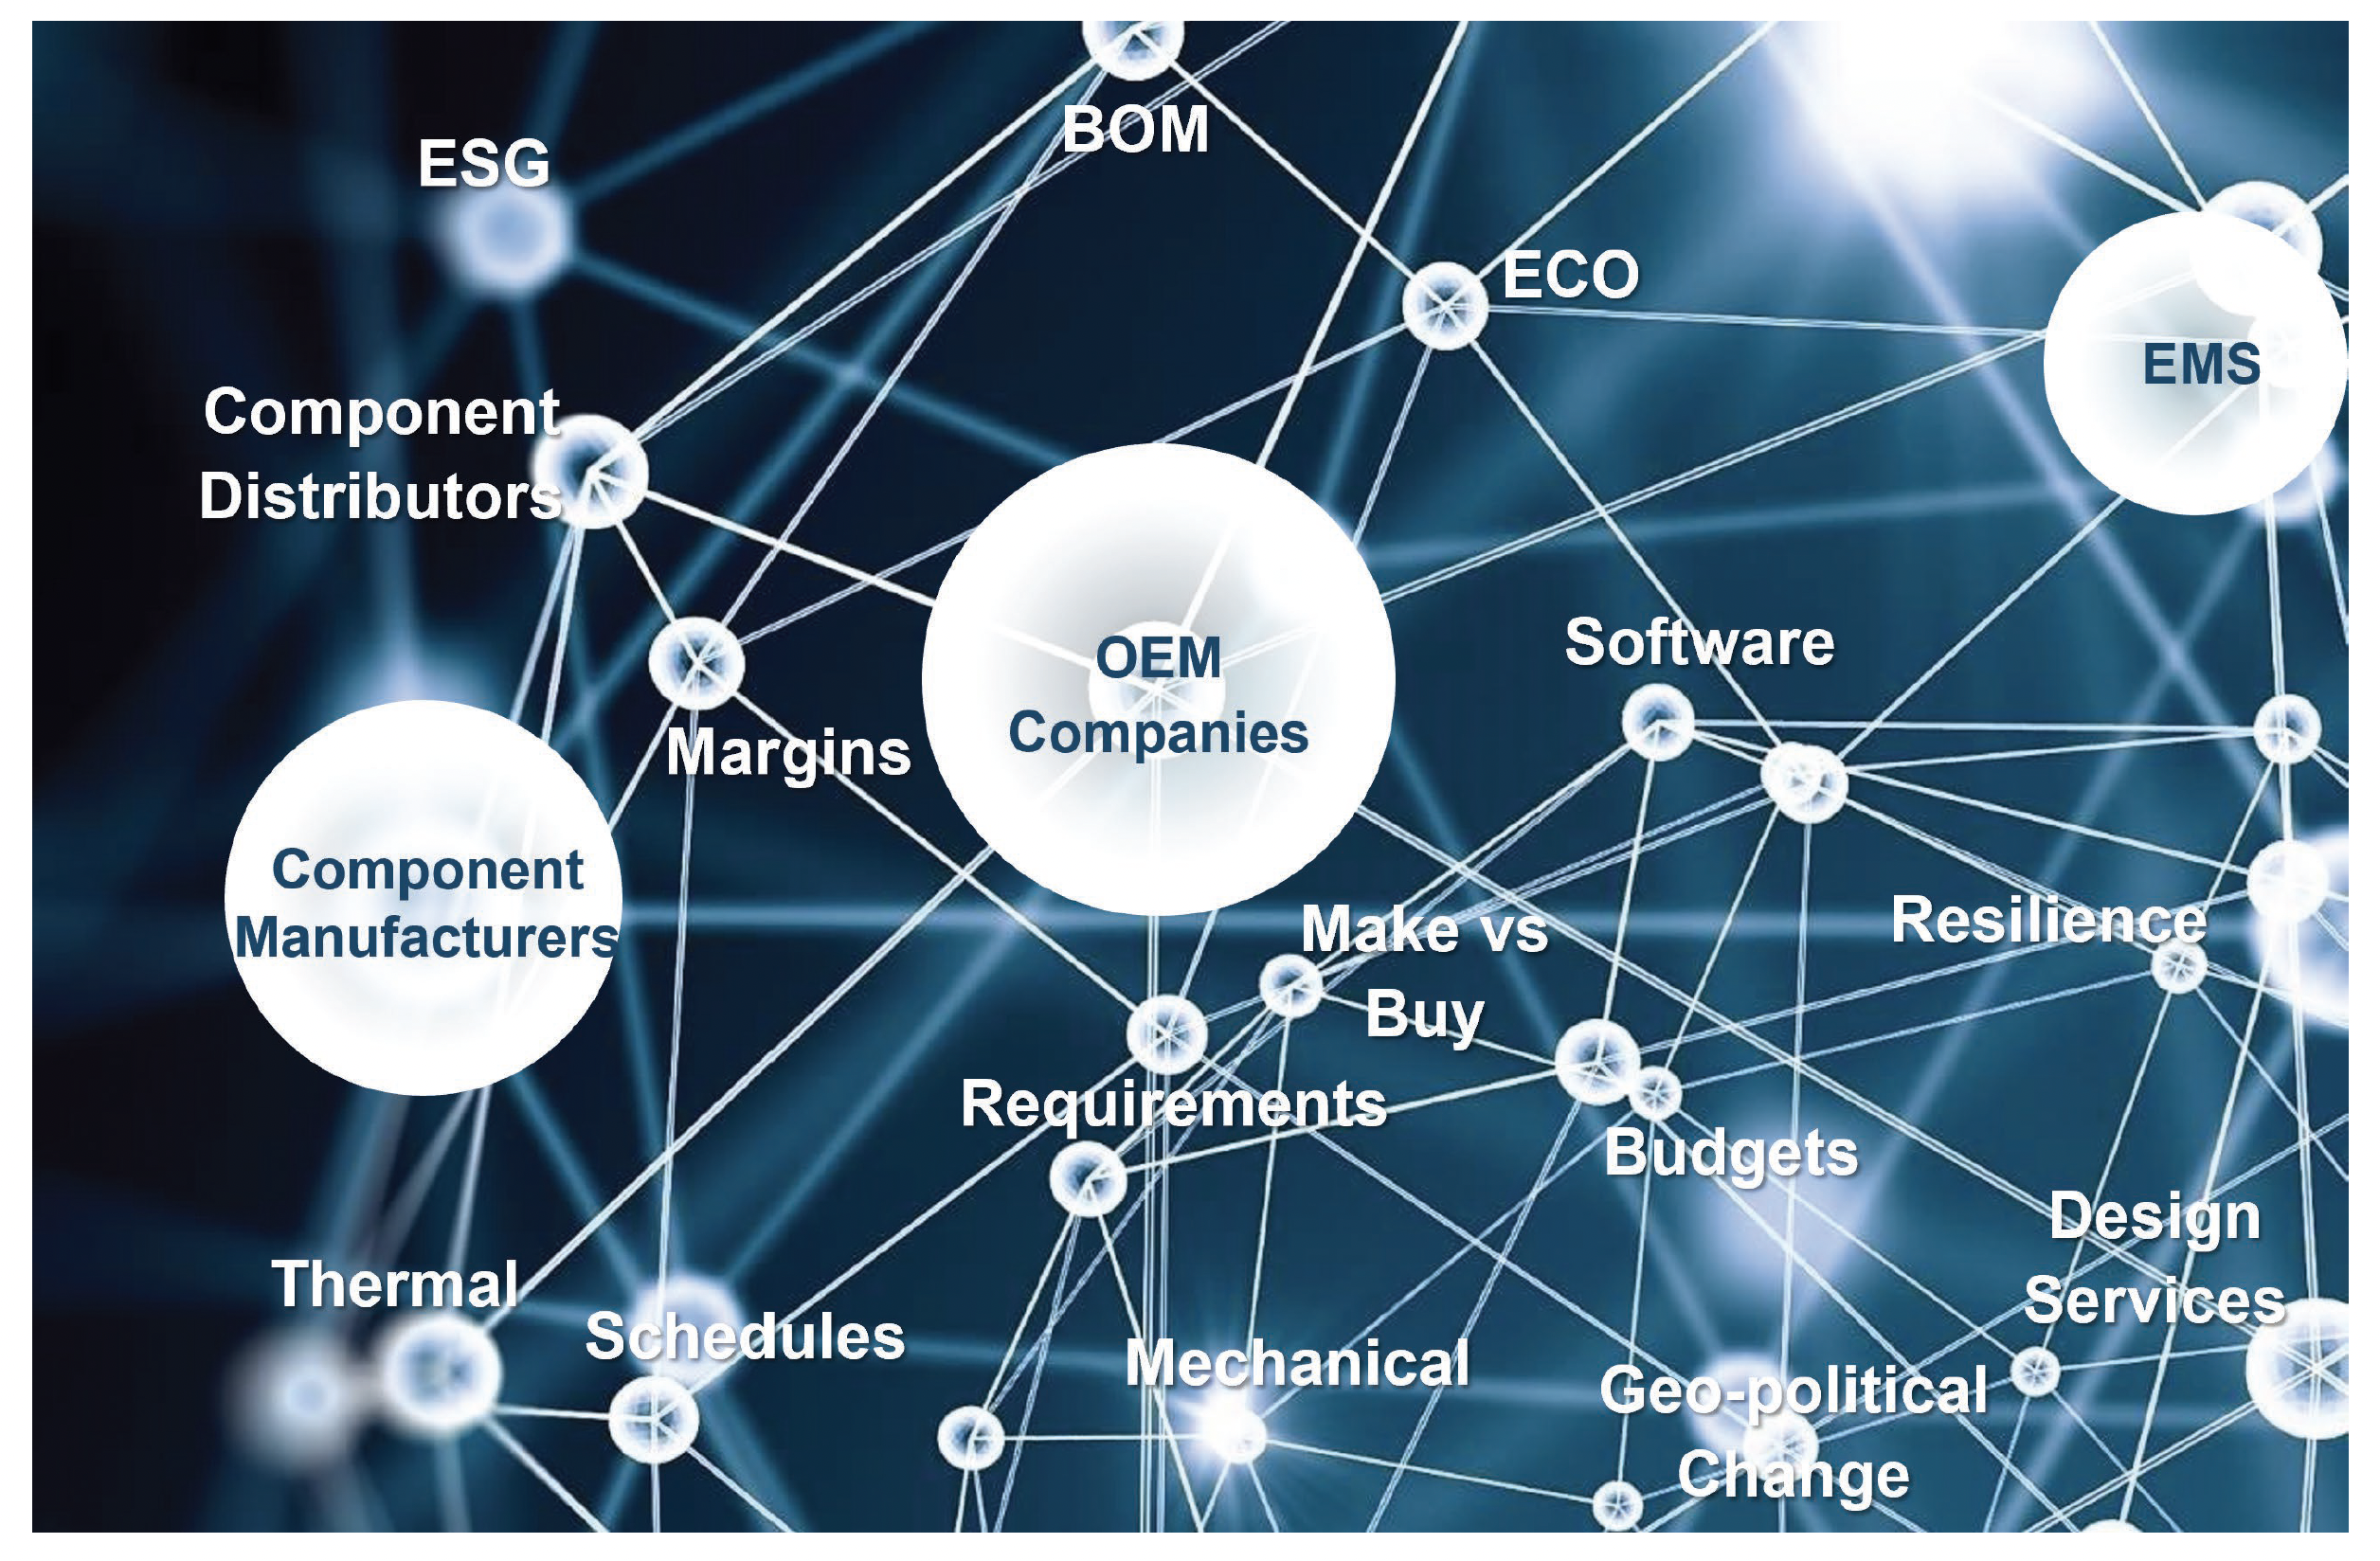 Complexity from Disaggregated Electronics Value Chain